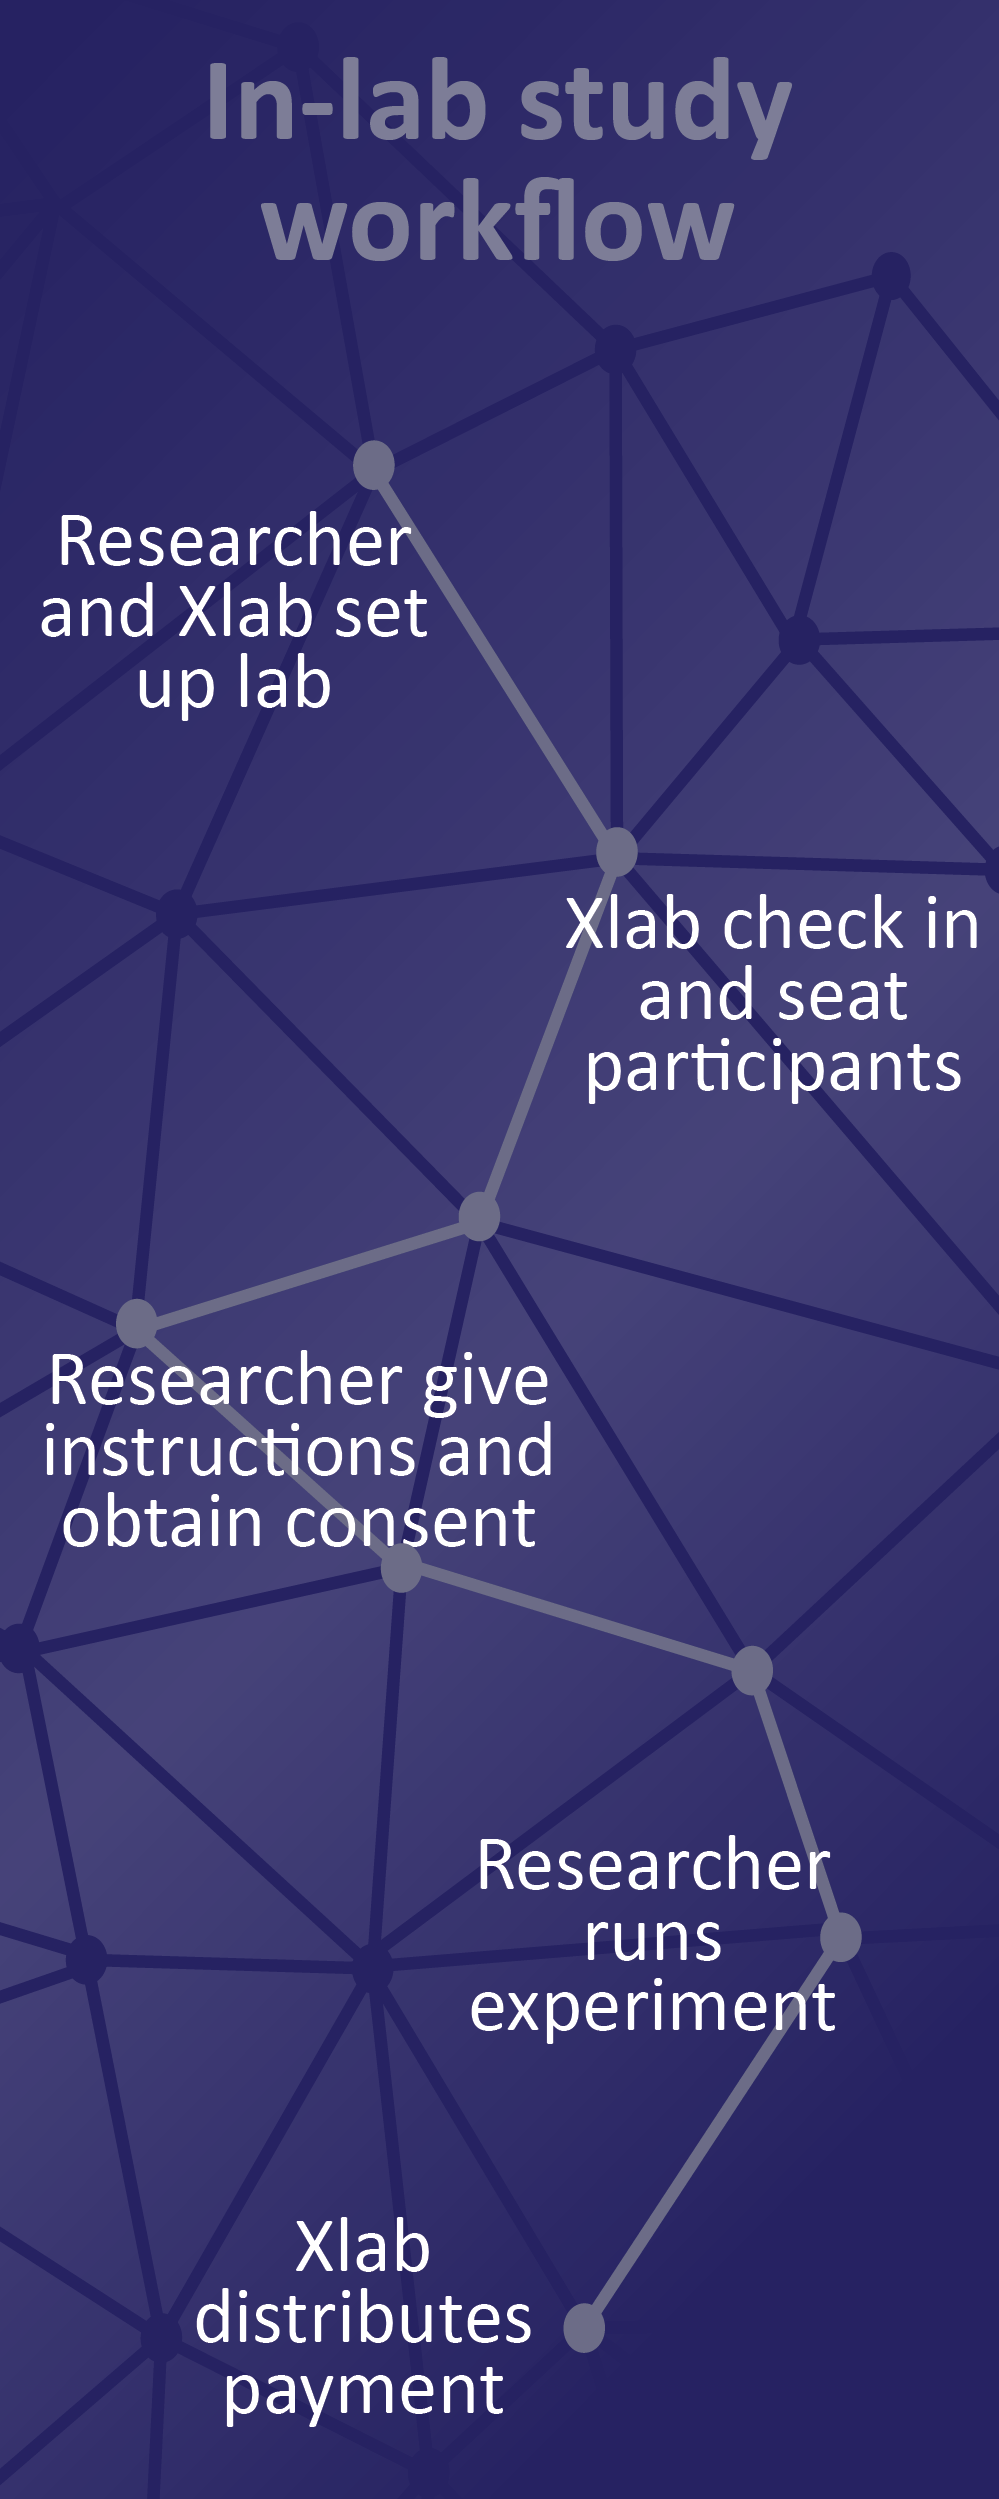 Graphic for In-lab study workflow: Researhcer and Xlab set up lab -- Xlab check in and seat participants -- Researcher gives instructions and obtains consent -- Researcher runs experiment -- Xlab distributes payment.